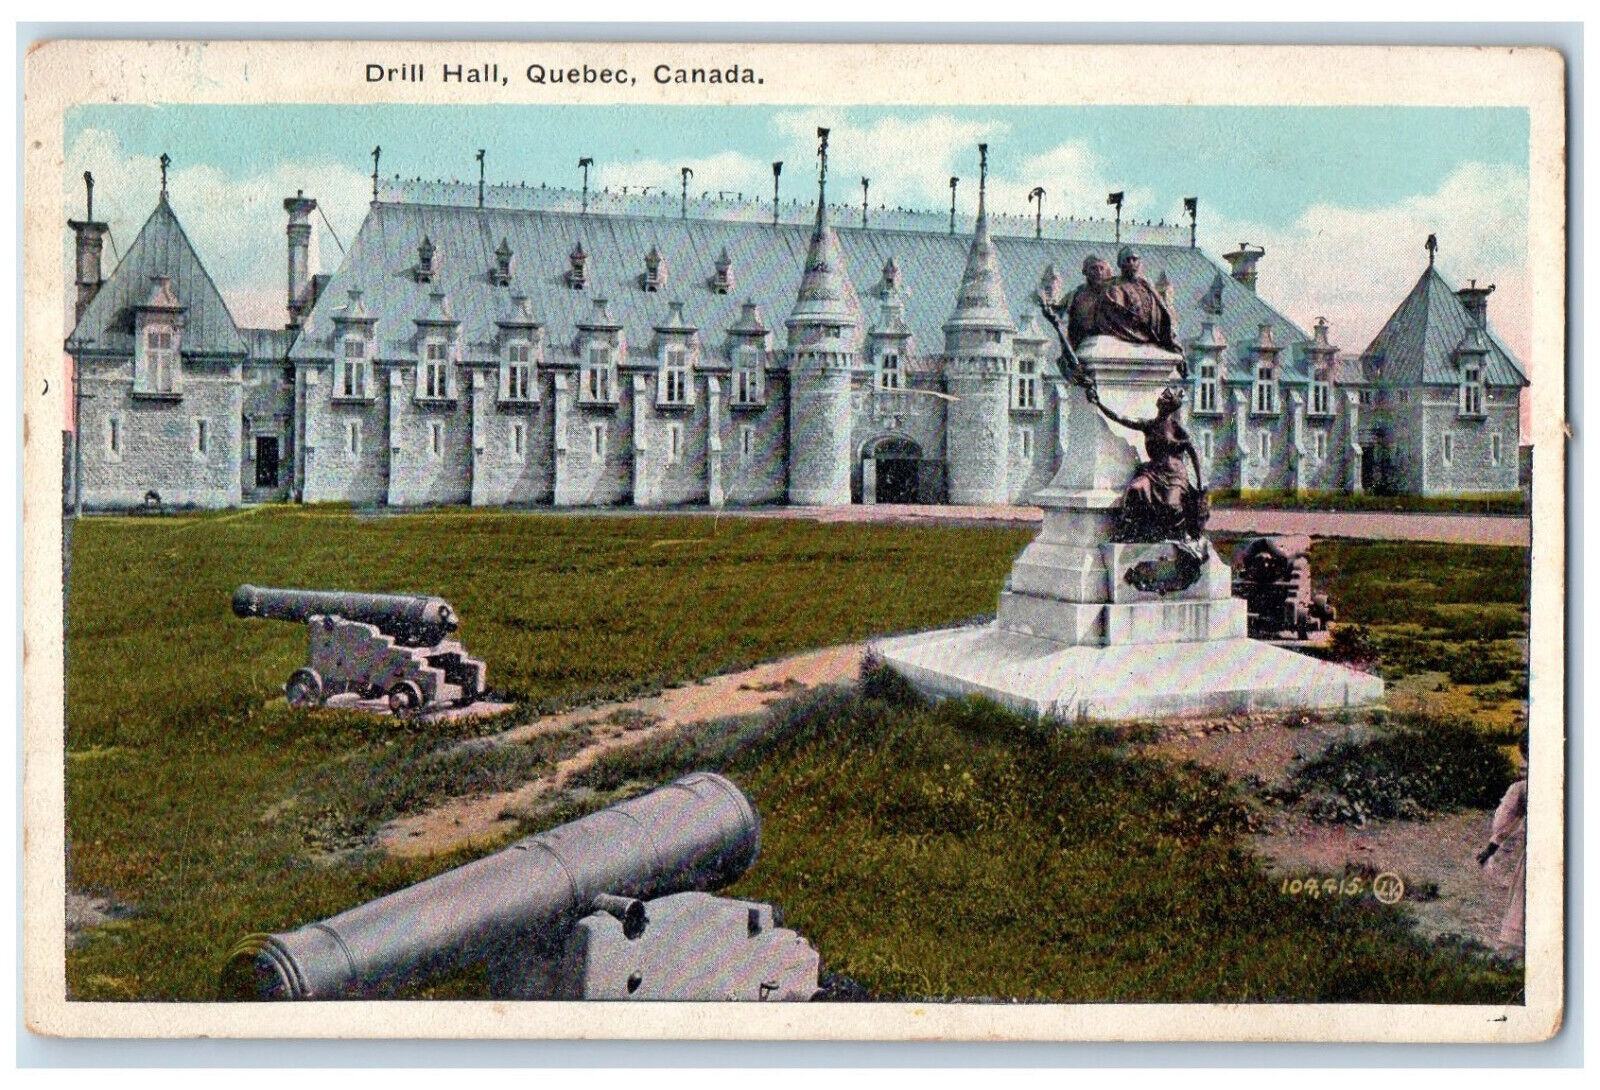 c1920's Drill Hall Entrance Cannon Monument Quebec Canada Posted Postcard